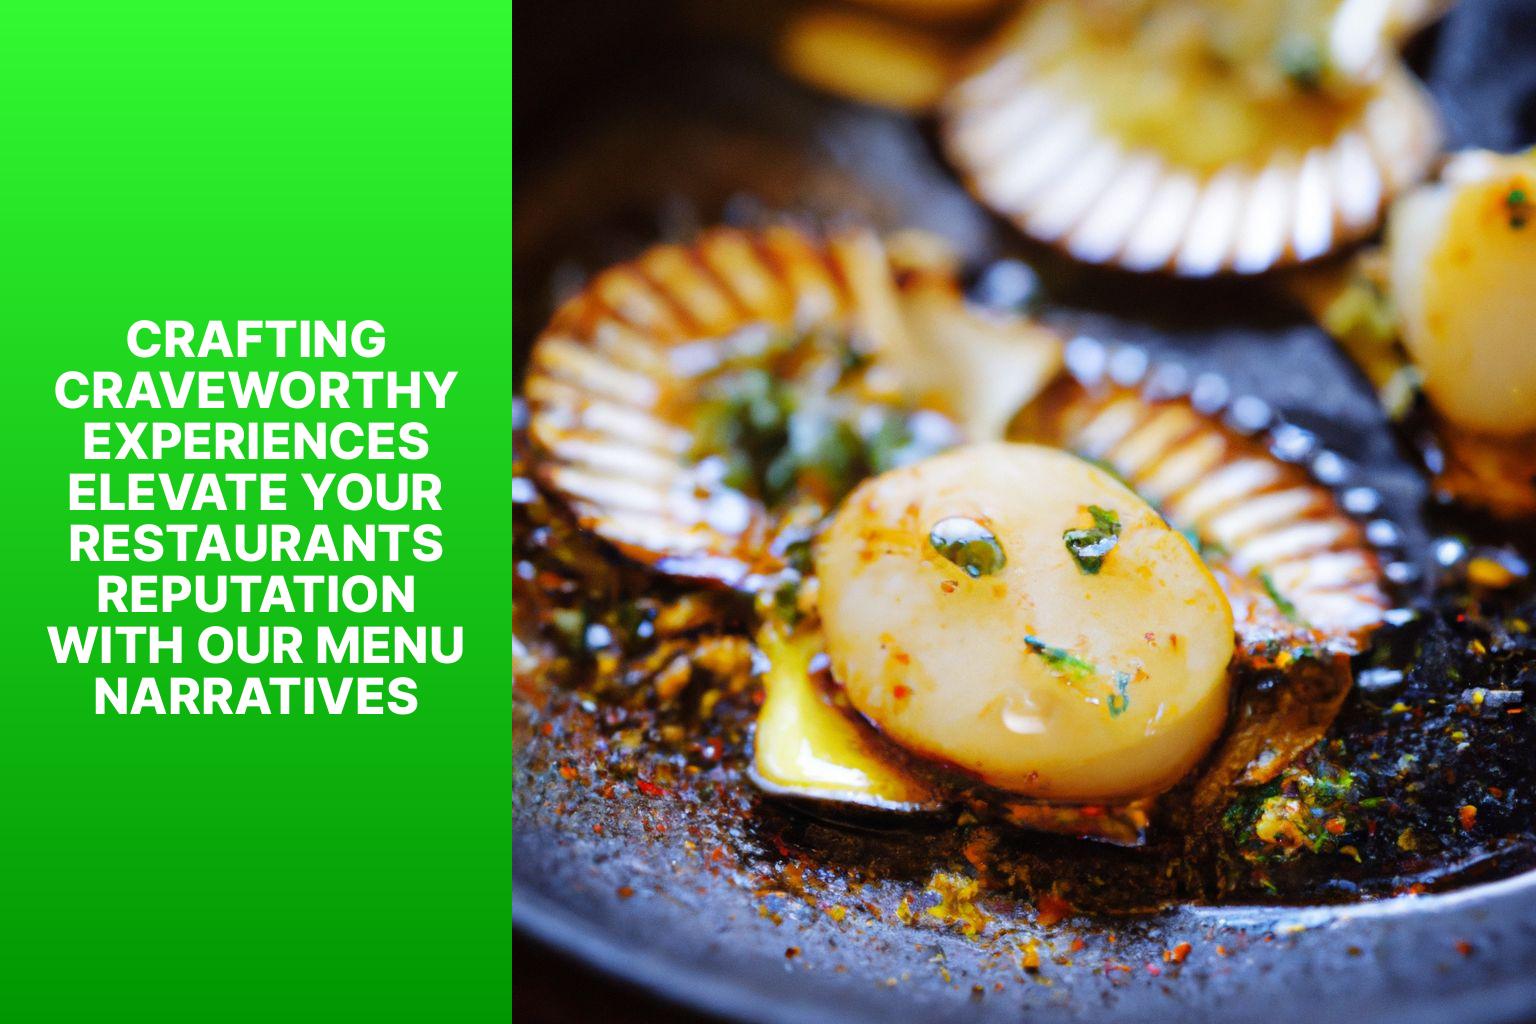 Crafting CraveWorthy Experiences Elevate Your Restaurants Reputation with Our Menu Narratives